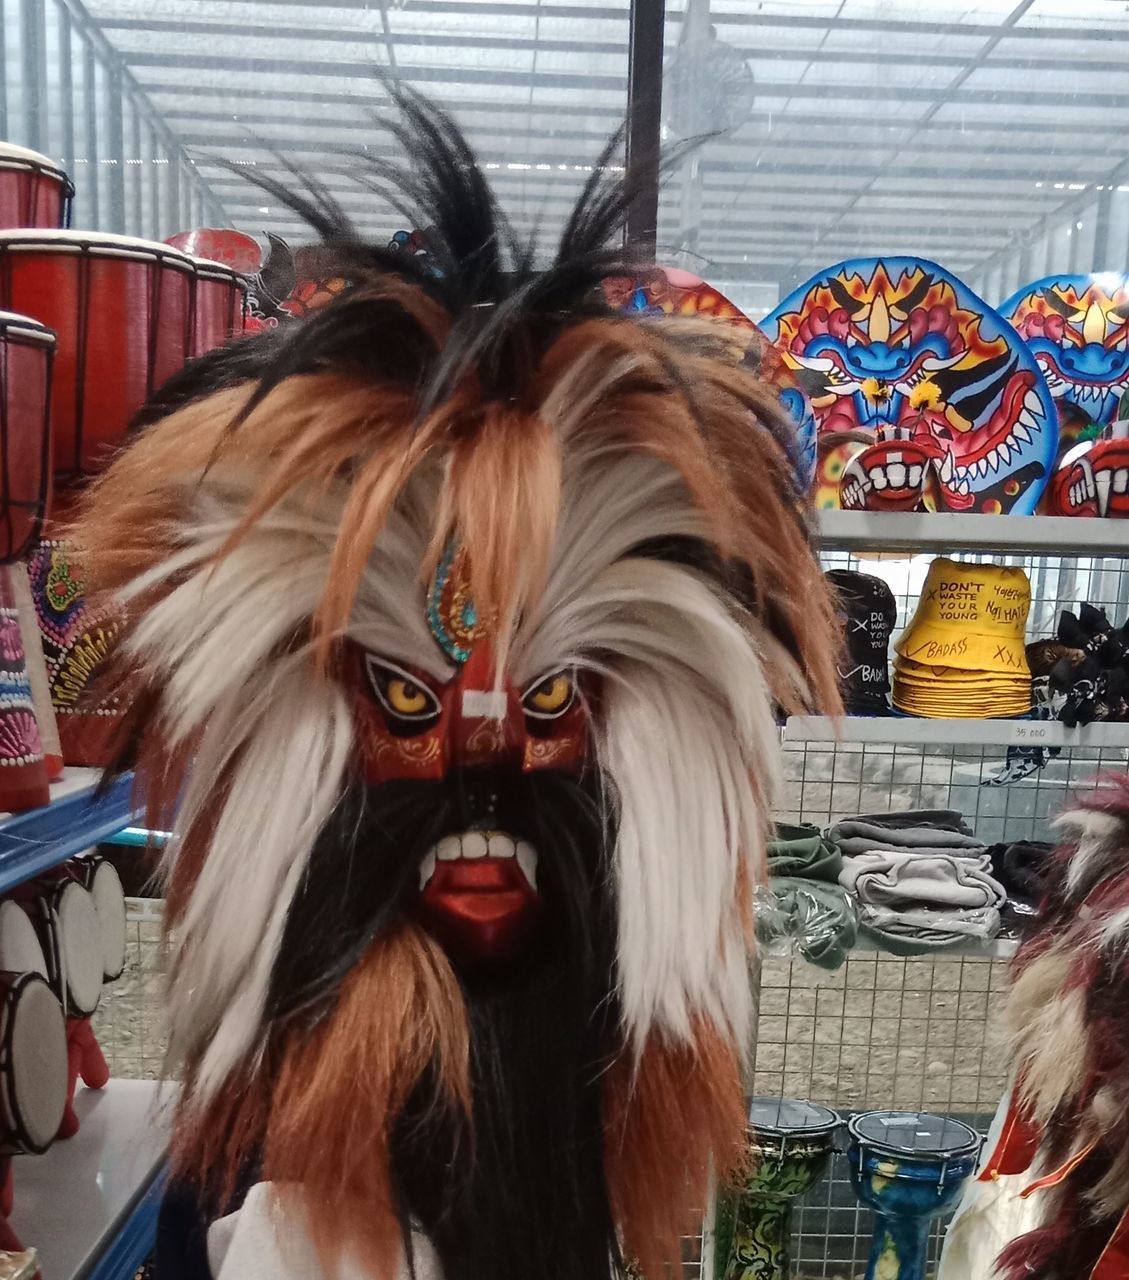 Art and culture Arts Culture And Entertainment Culture Traditional Mask